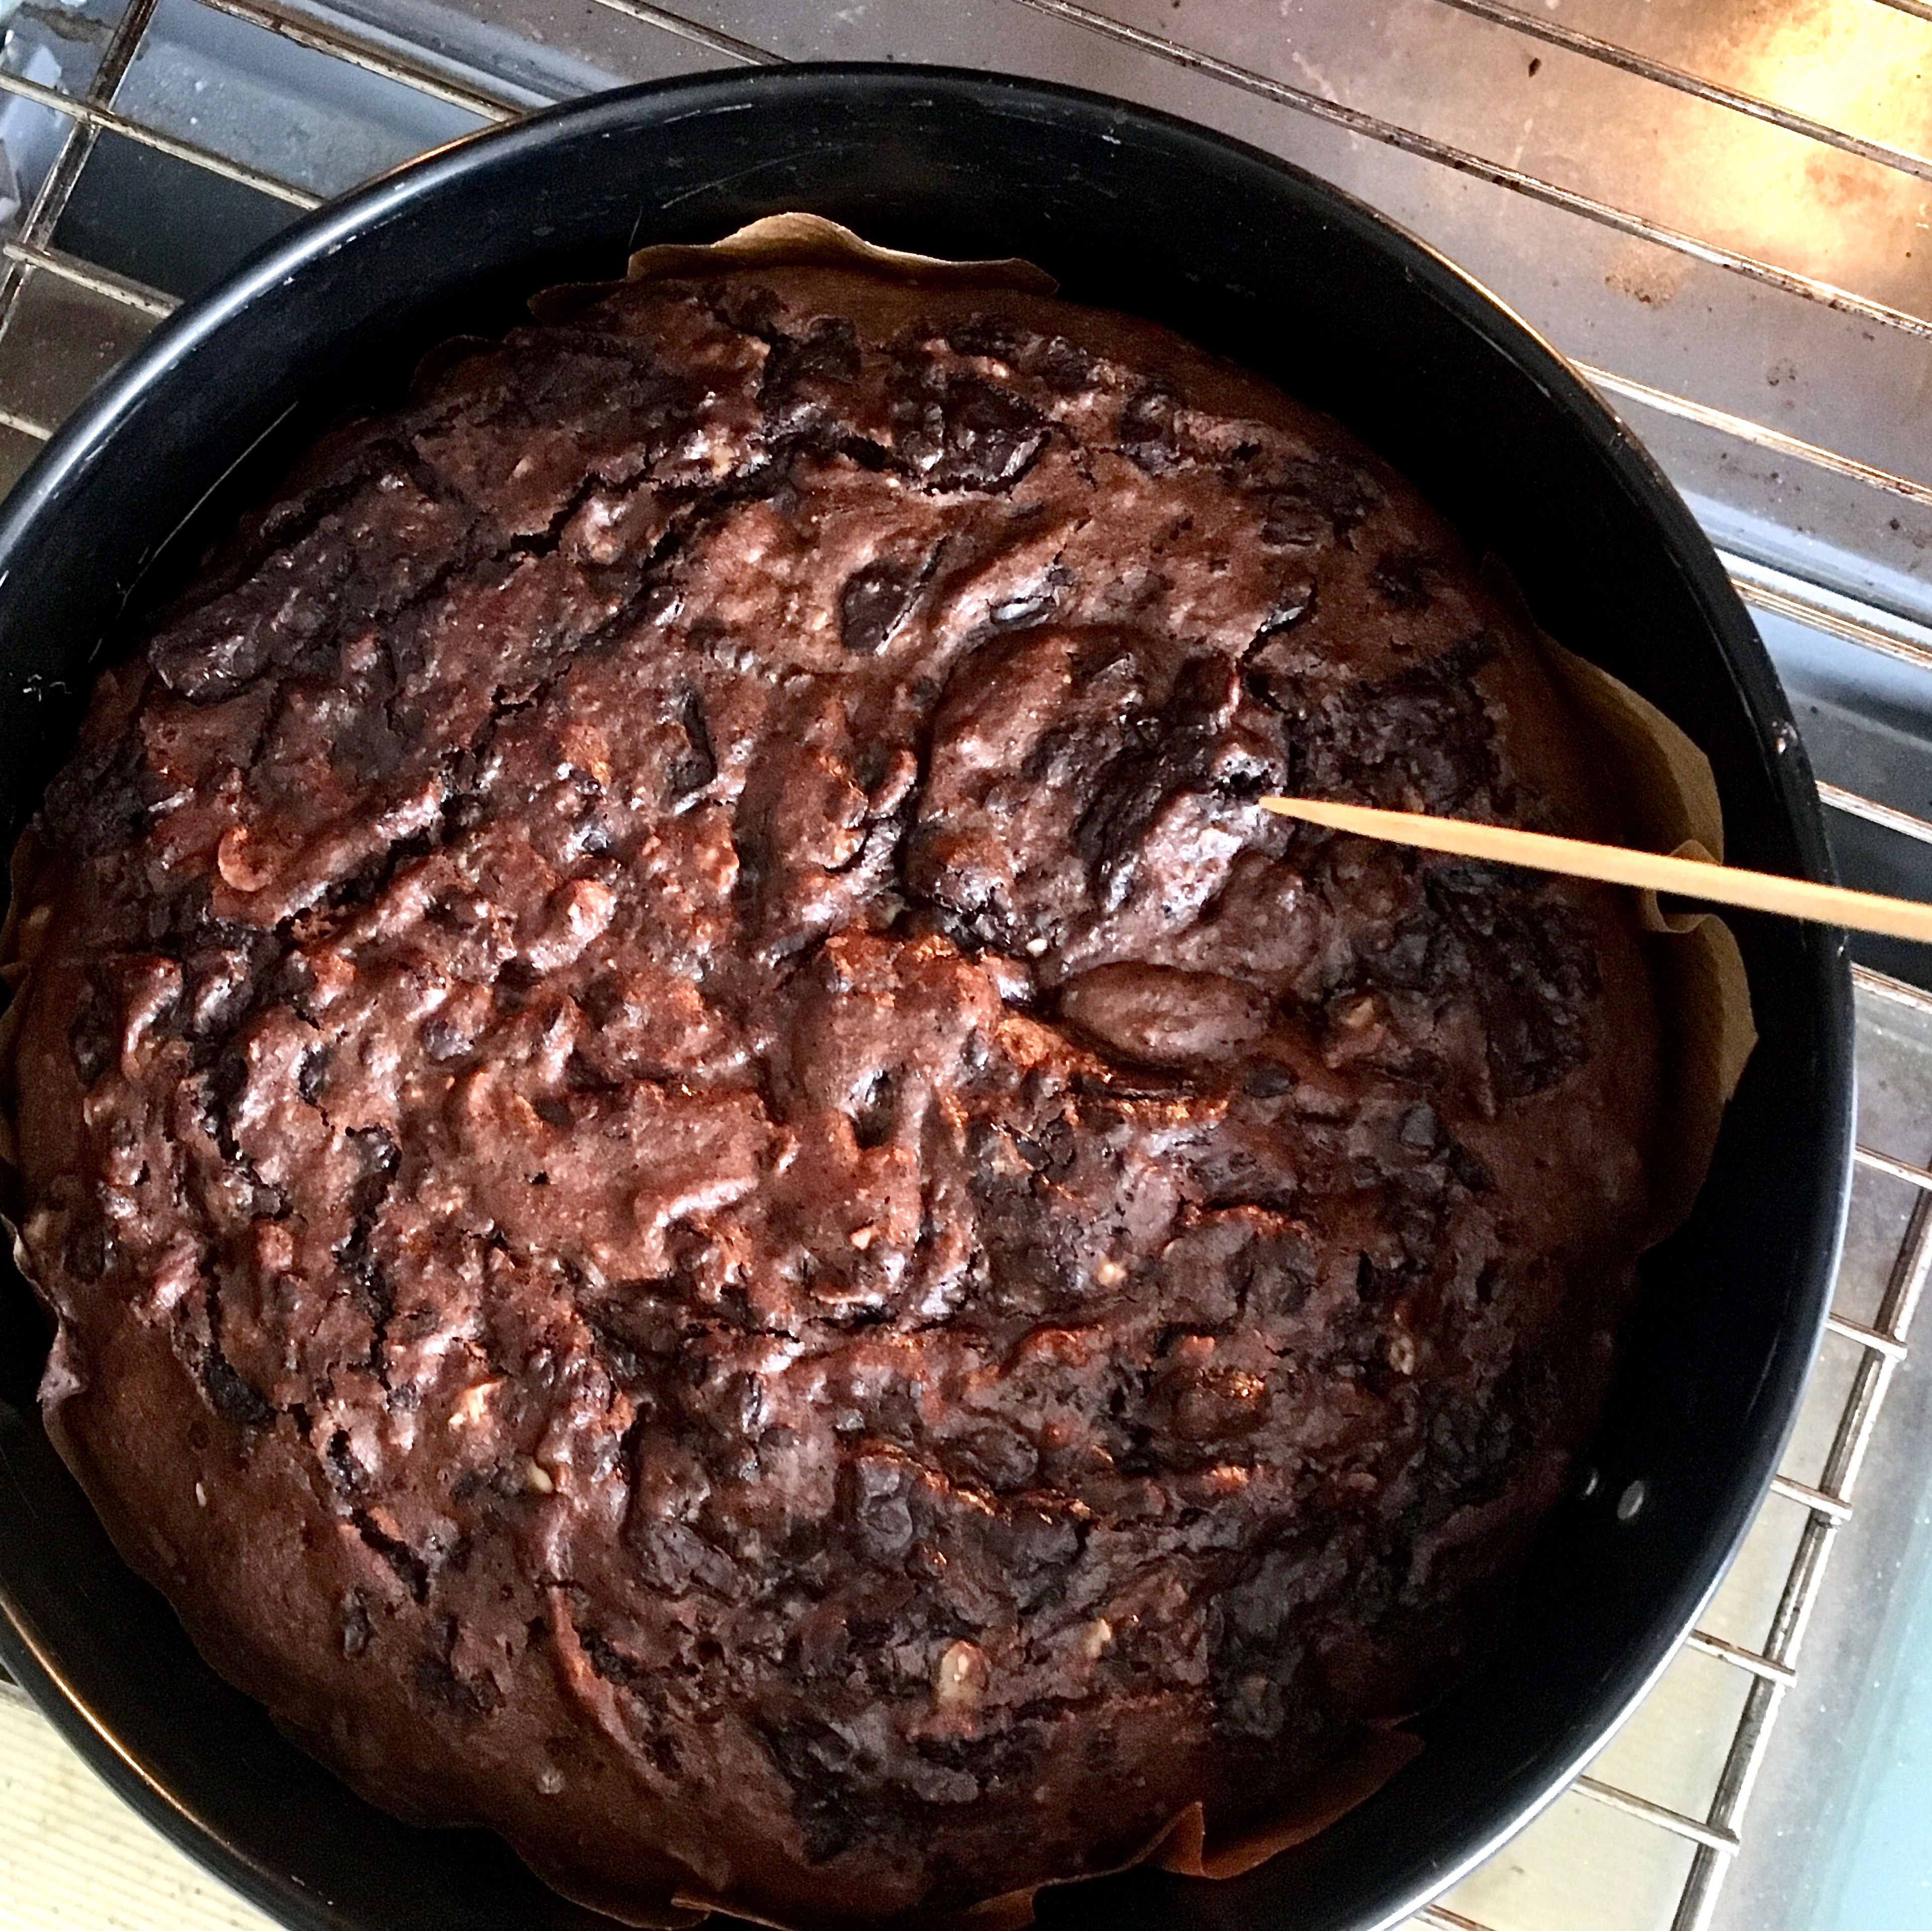 After half an hour, check the cake doneness by poking a toothpick or wooden skewer into the cake, it should come out clean. Remove the cake from the oven. In case your cake is not fully baked, you may need to cover the surface with foil to prevent from drying out or over browning.